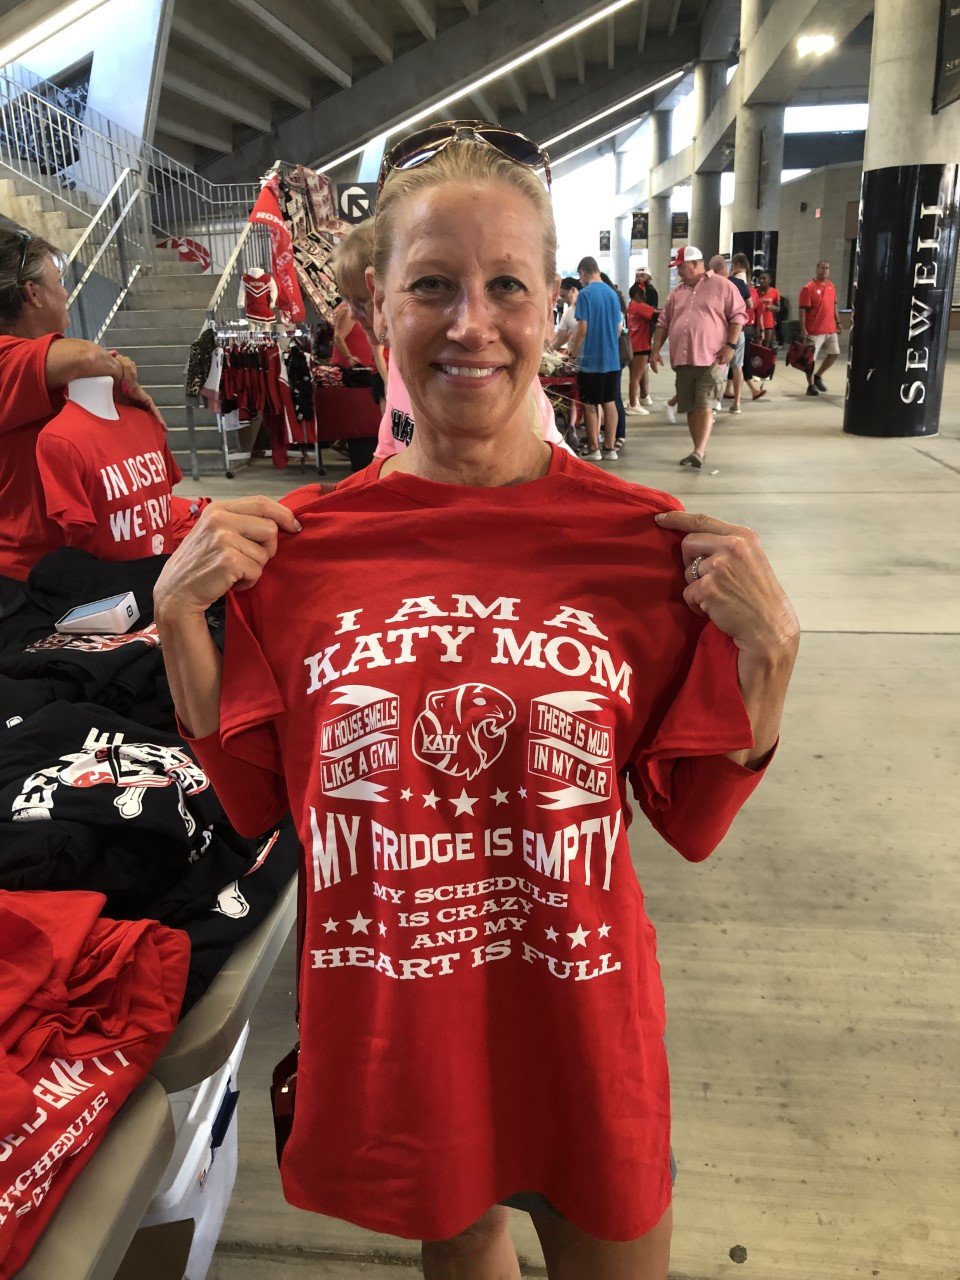 Kara Gunderson is the mother of Katy basketball player Jay Rasmuson. She said the description on the shirt was accurate: her fridge was empty, her schedule was crazy and her heart was full.